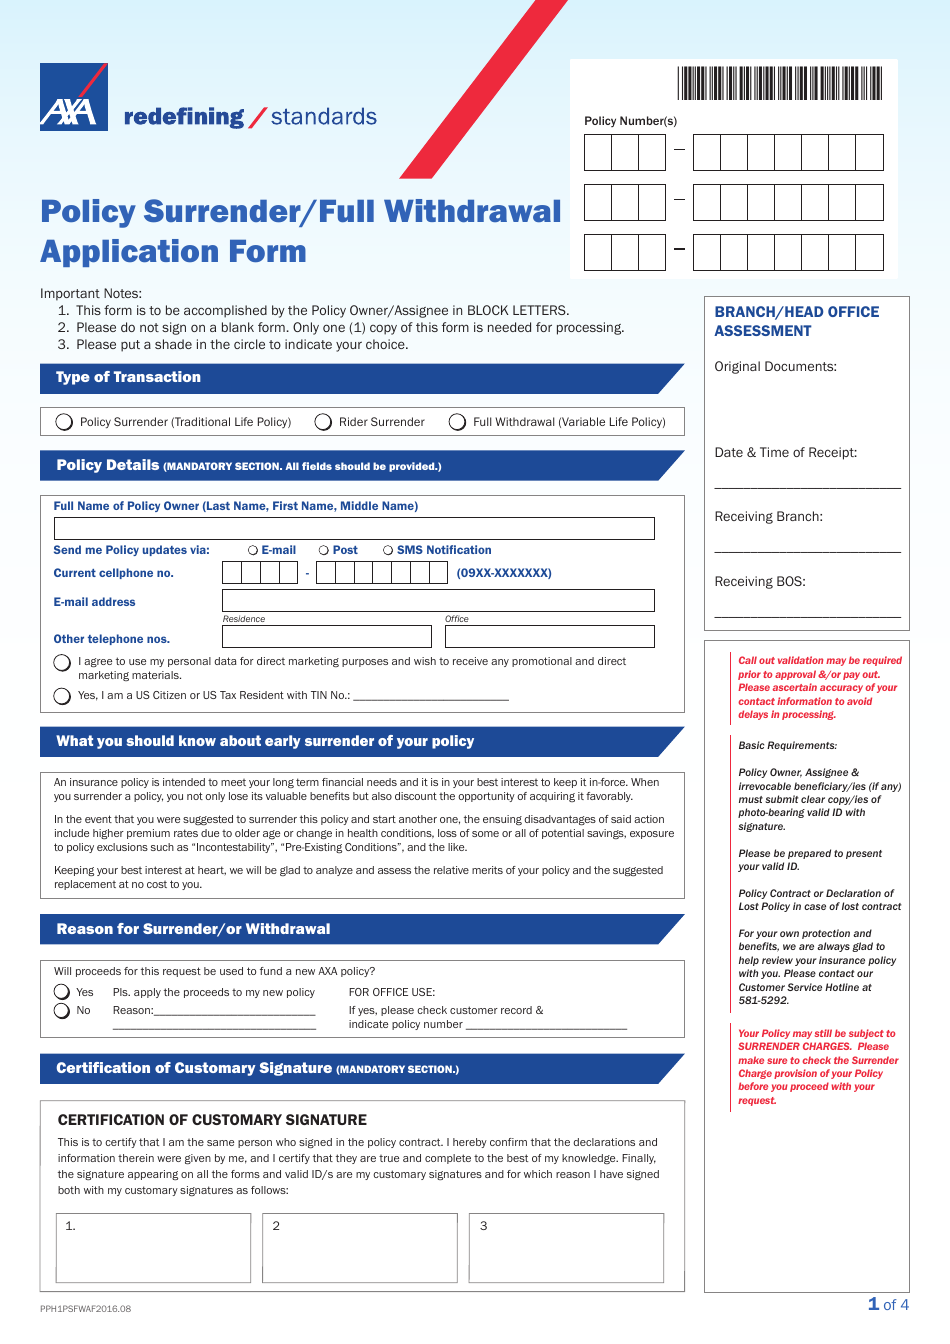 Policy Surrender/Full Withdrawal Application Form - Axa Equitable Life Insurance - Philippines, Page 1